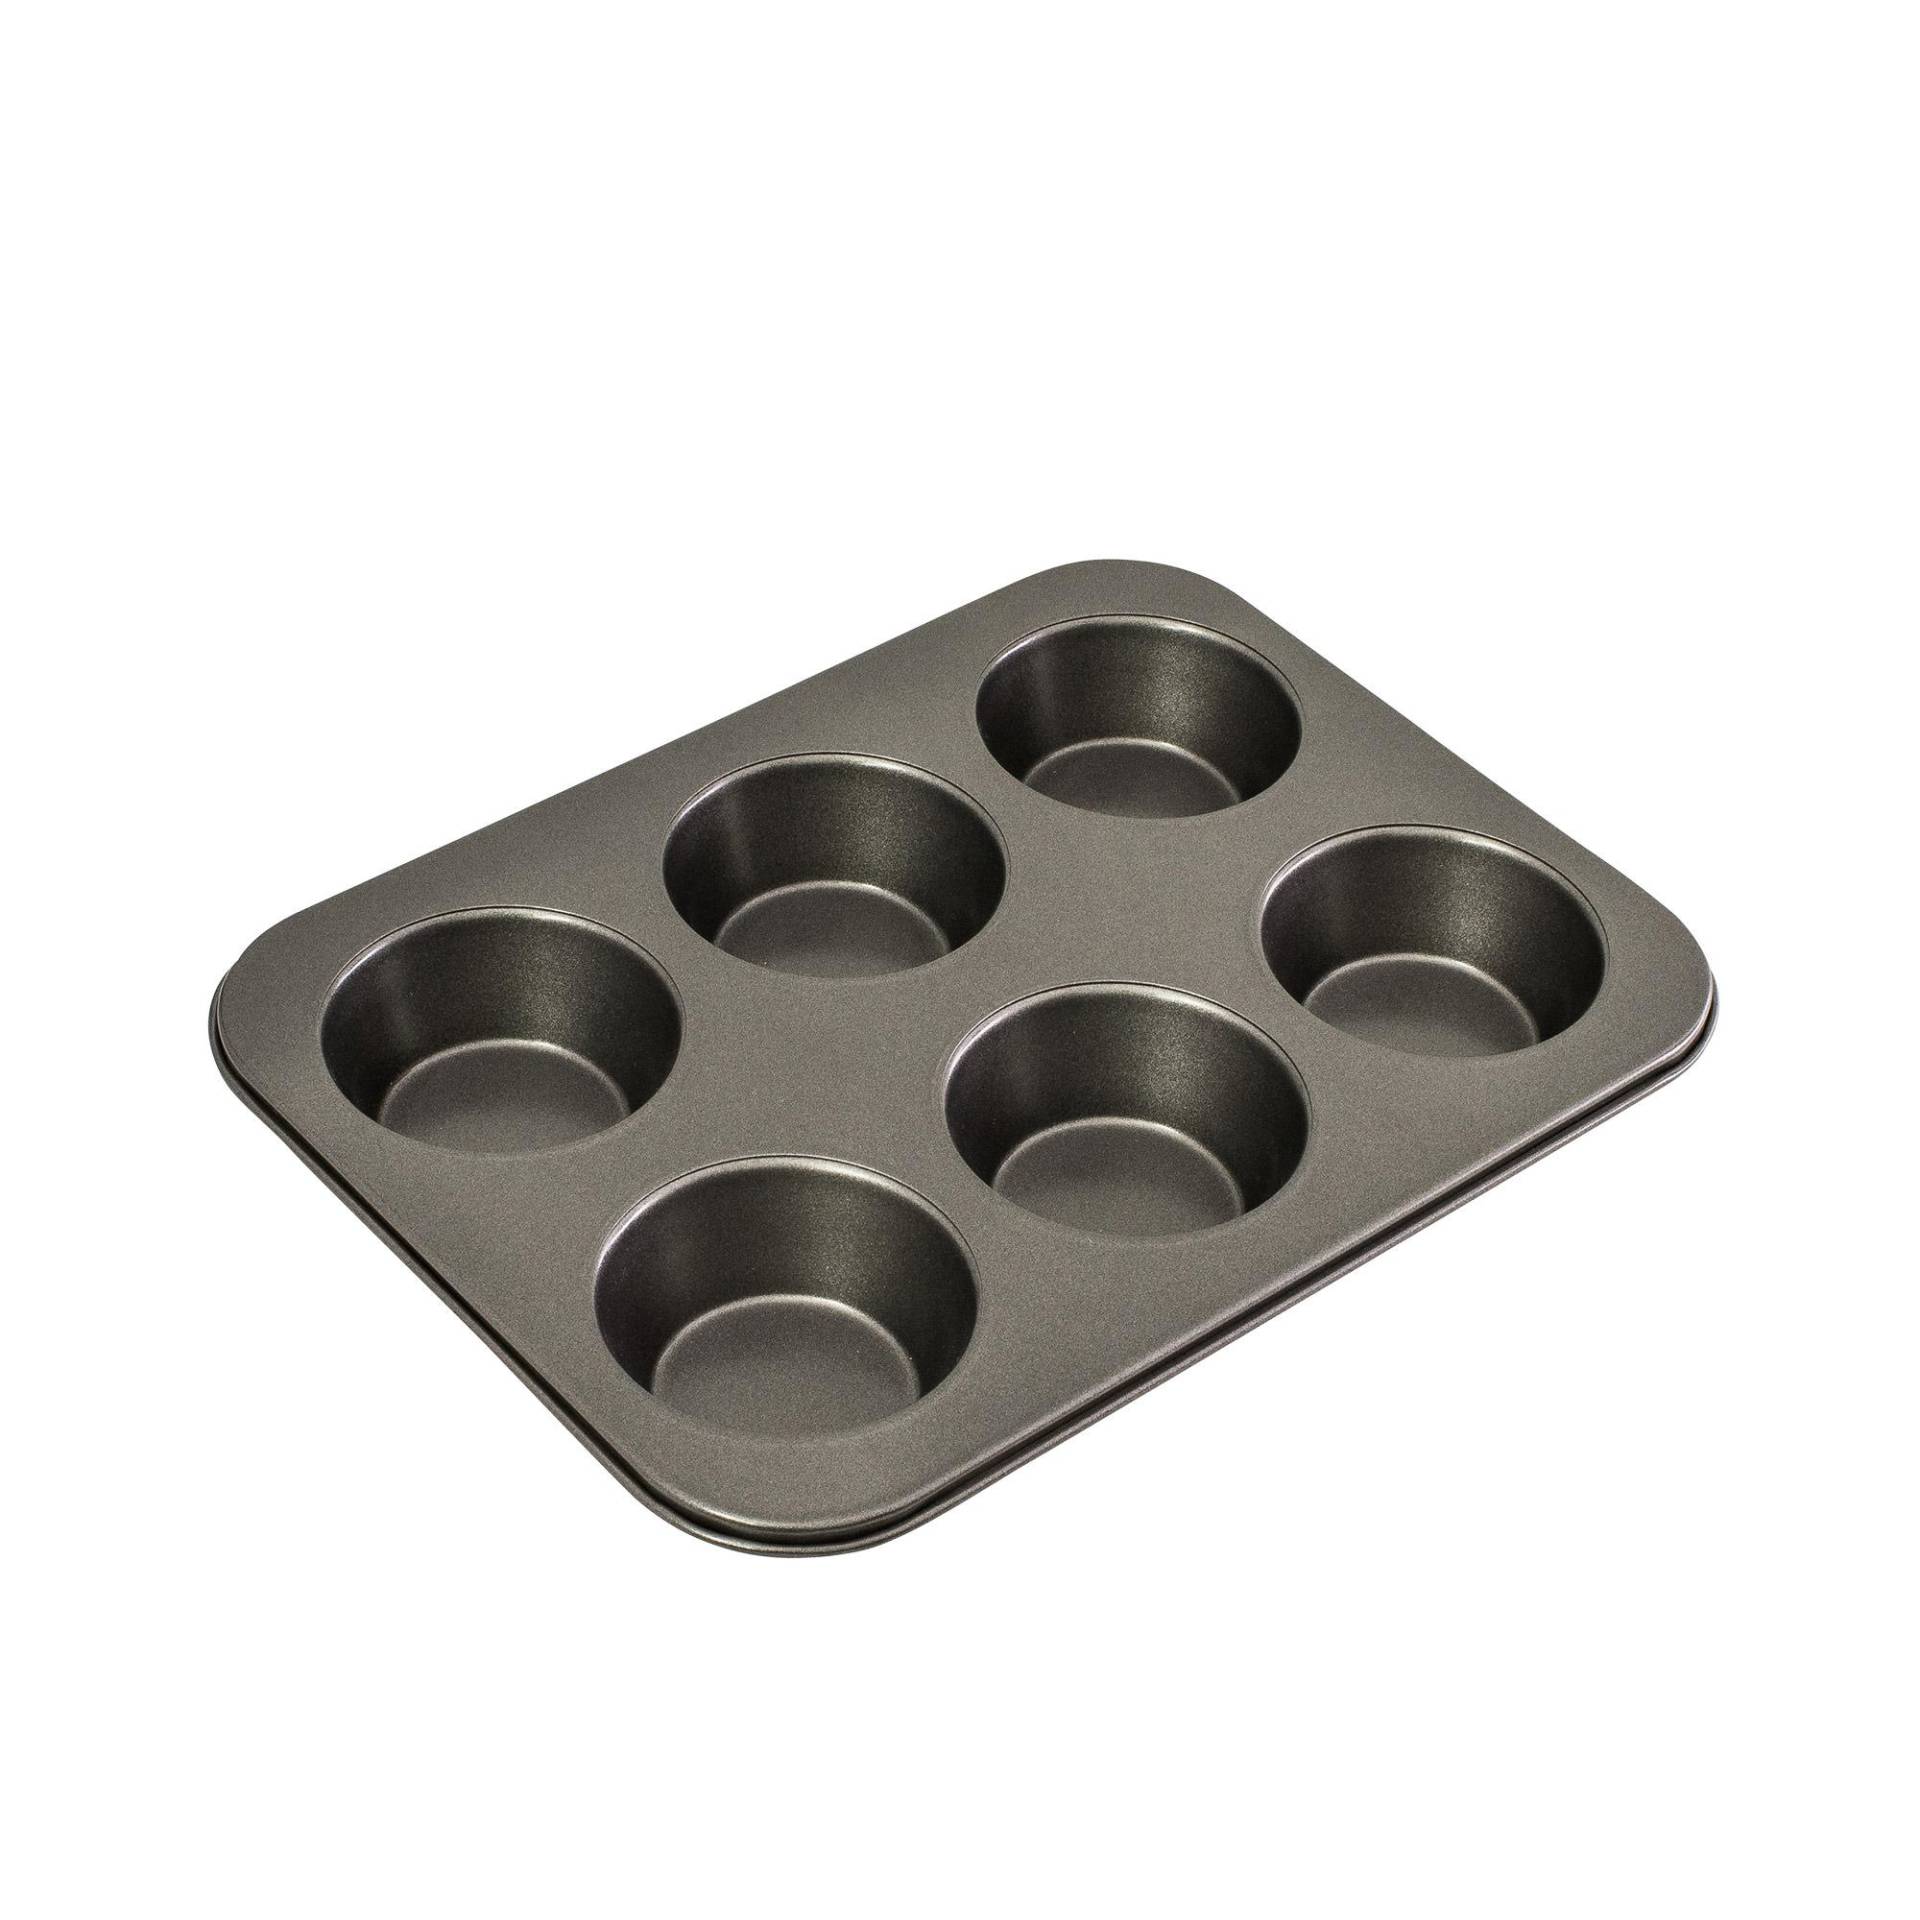 Bakemaster Non Stick Large Muffin Pan 6 Cup